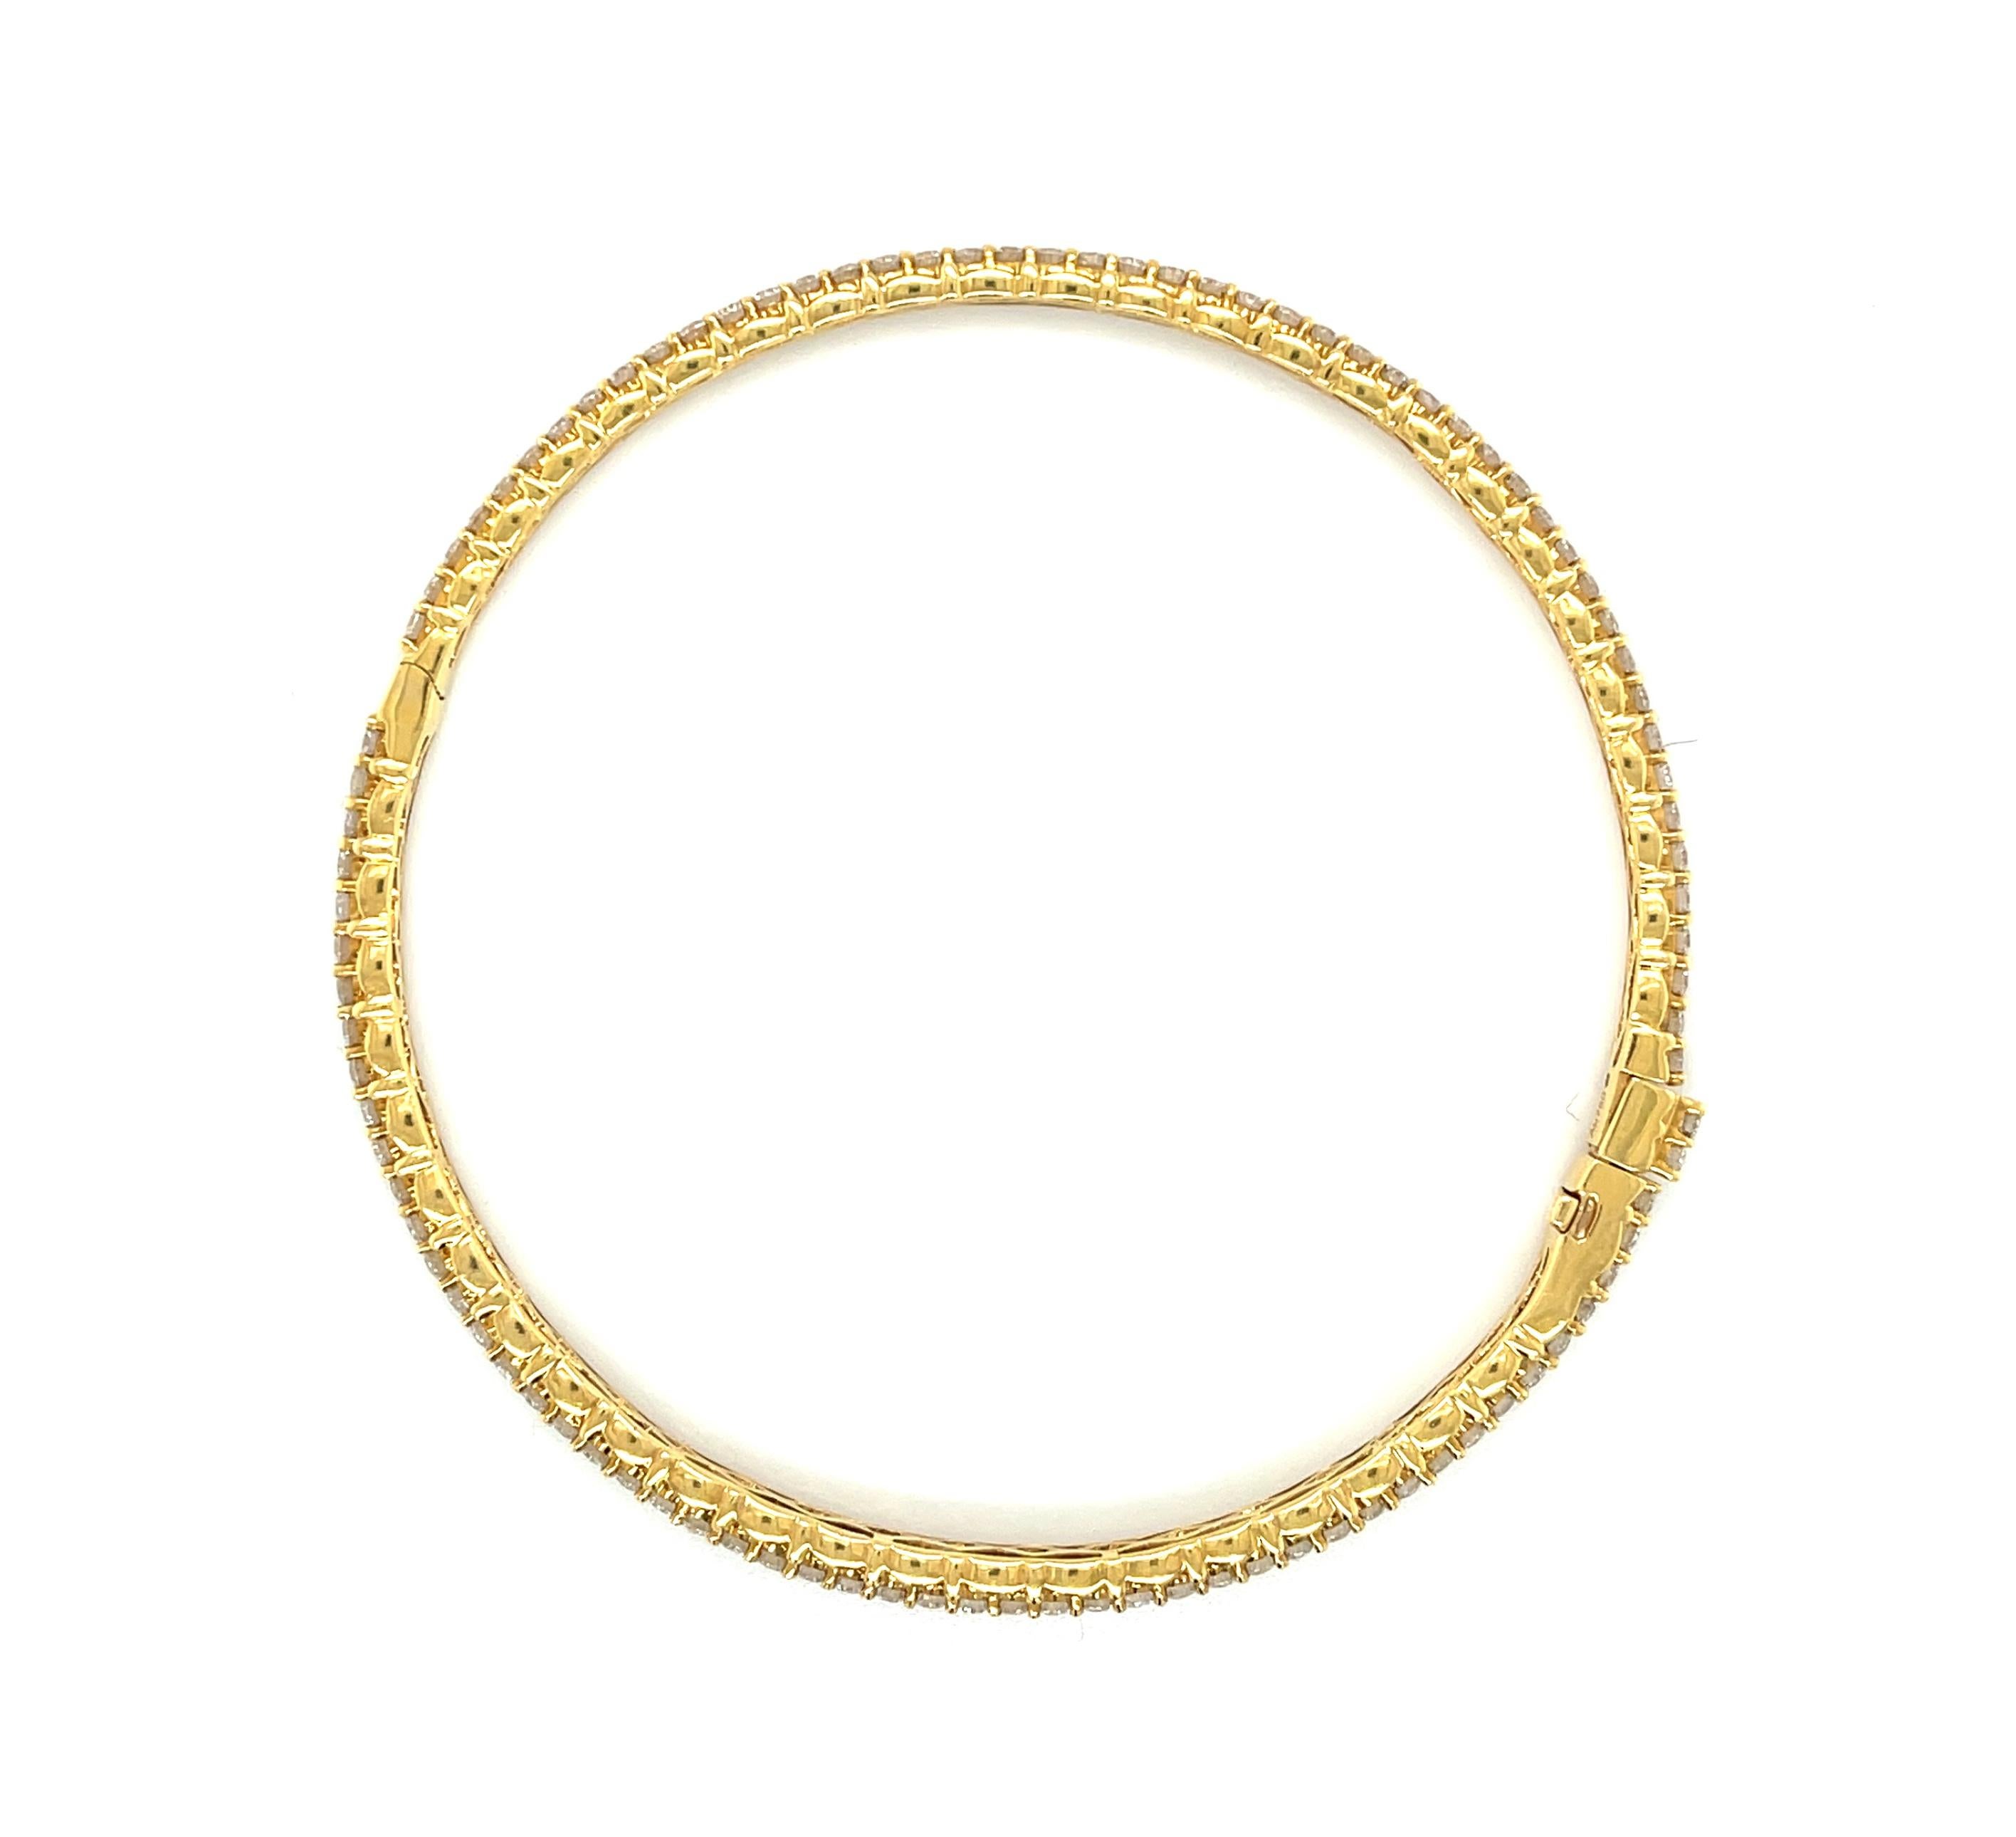 Round Cut Diamond and Yellow Gold Circle Bangle Bracelet, 2.63 Carats Total For Sale